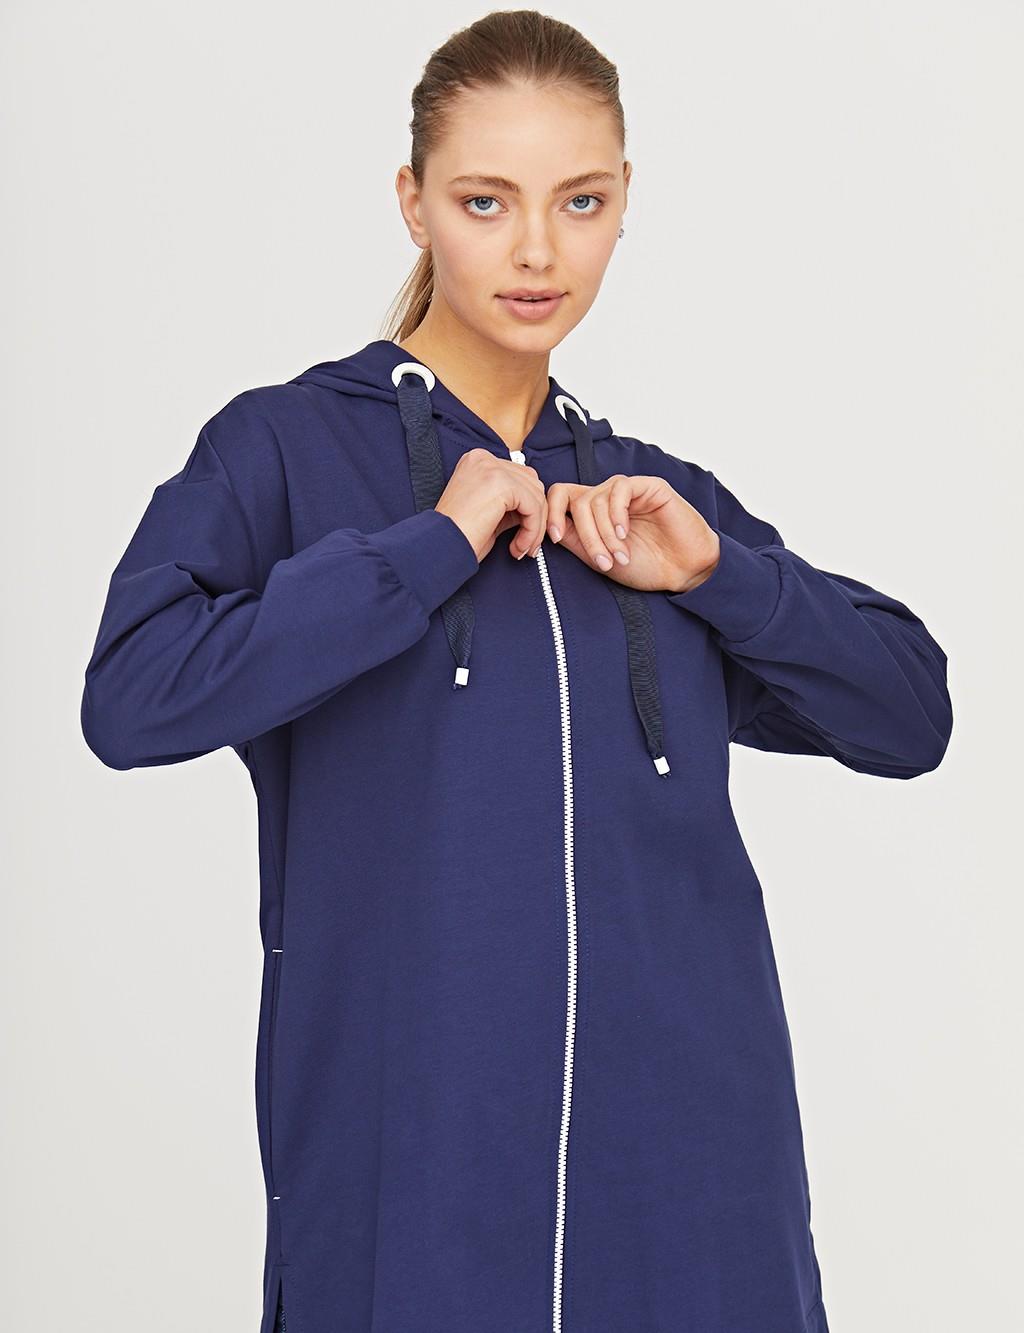 Compass Embroidered Sports Jacket B21 13006 Navy